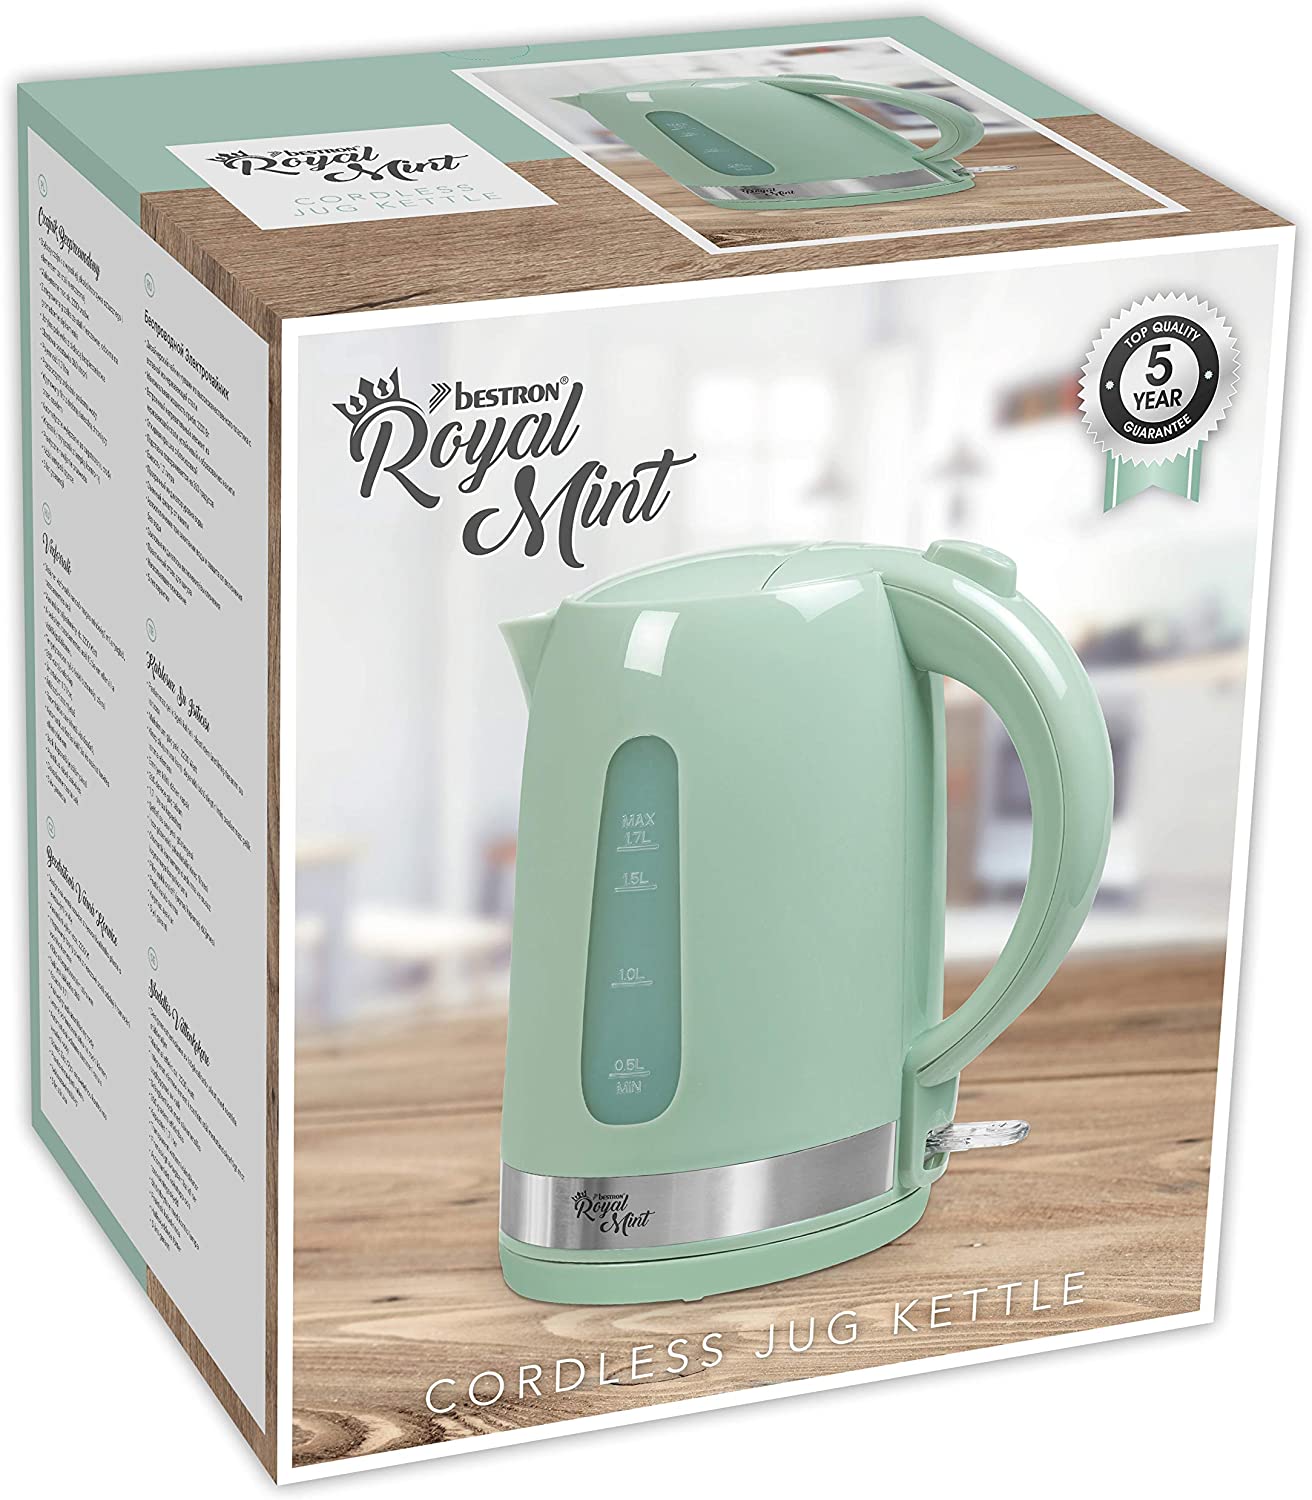 Bestron Designer Kettle with Automatic Cooking Stop, Royal Mint, 1.7 Litres, 2200 Watt, Mint Green